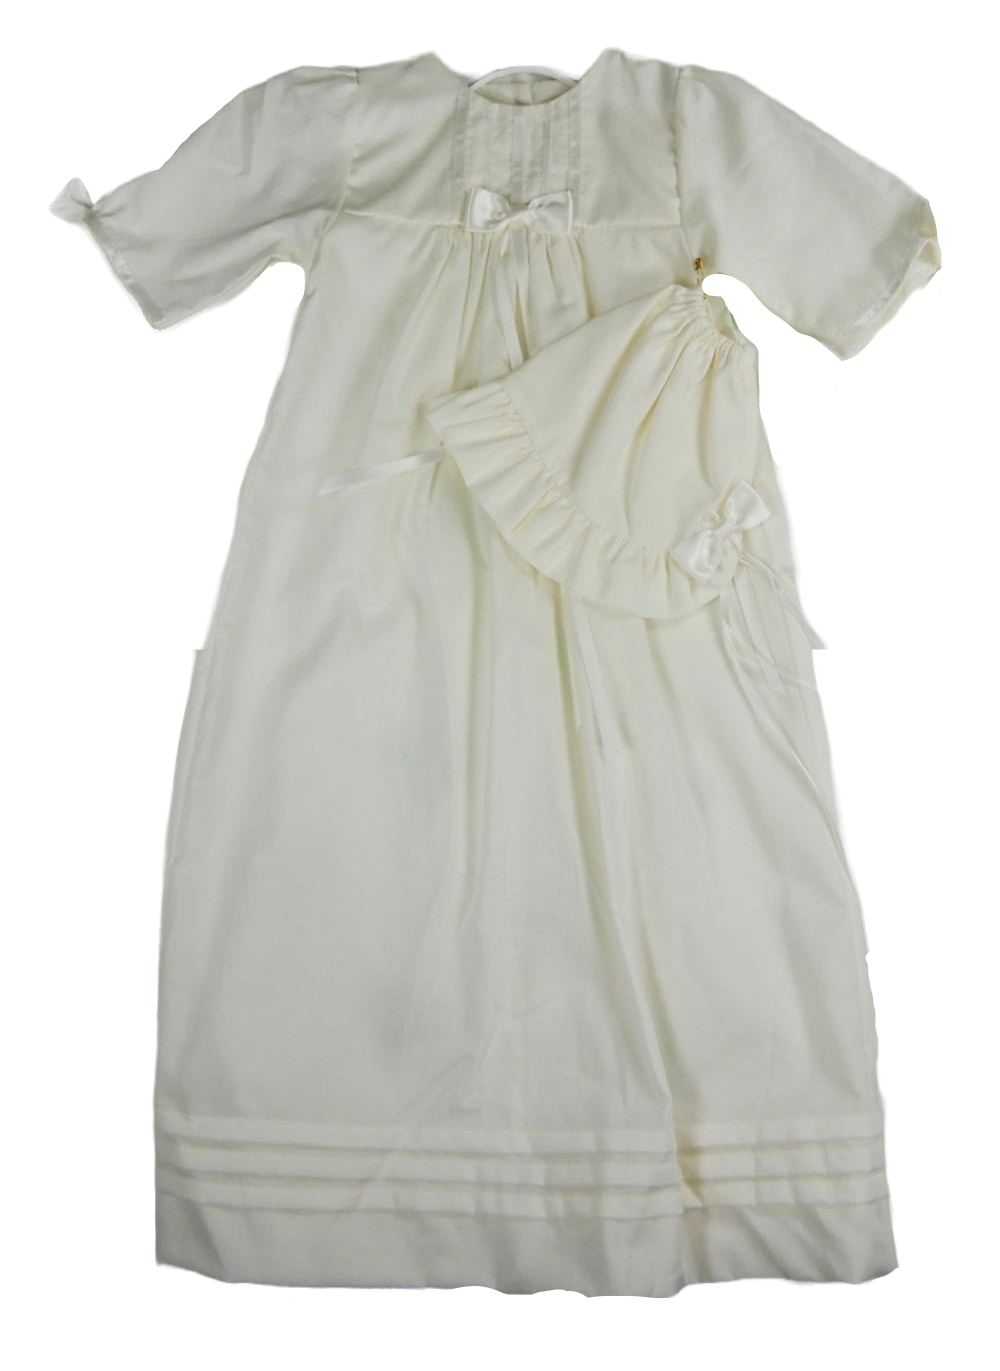 Girl's Christening Ivory Gown and Hat